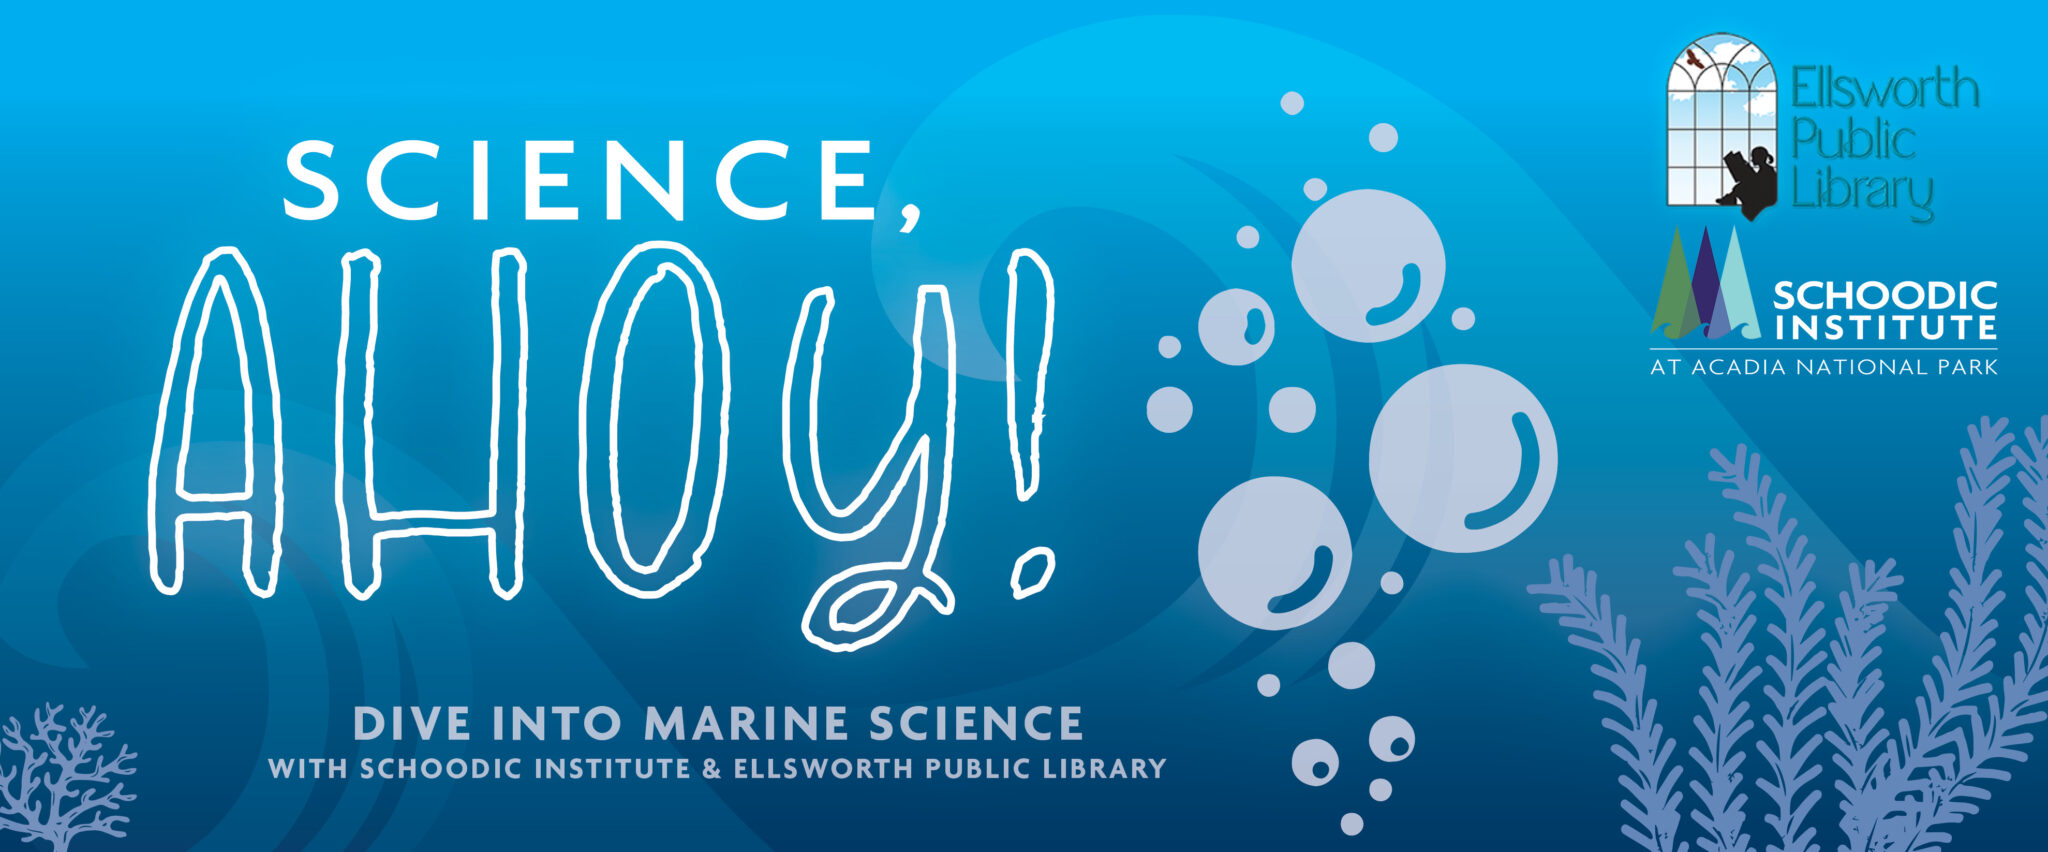 Science Ahoy! event promo graphic, with a blue gradient background, seaweed graphic, illustrative bubbles, and logos of Ellsworth Public Library and Schoodic Institute at right hand side.